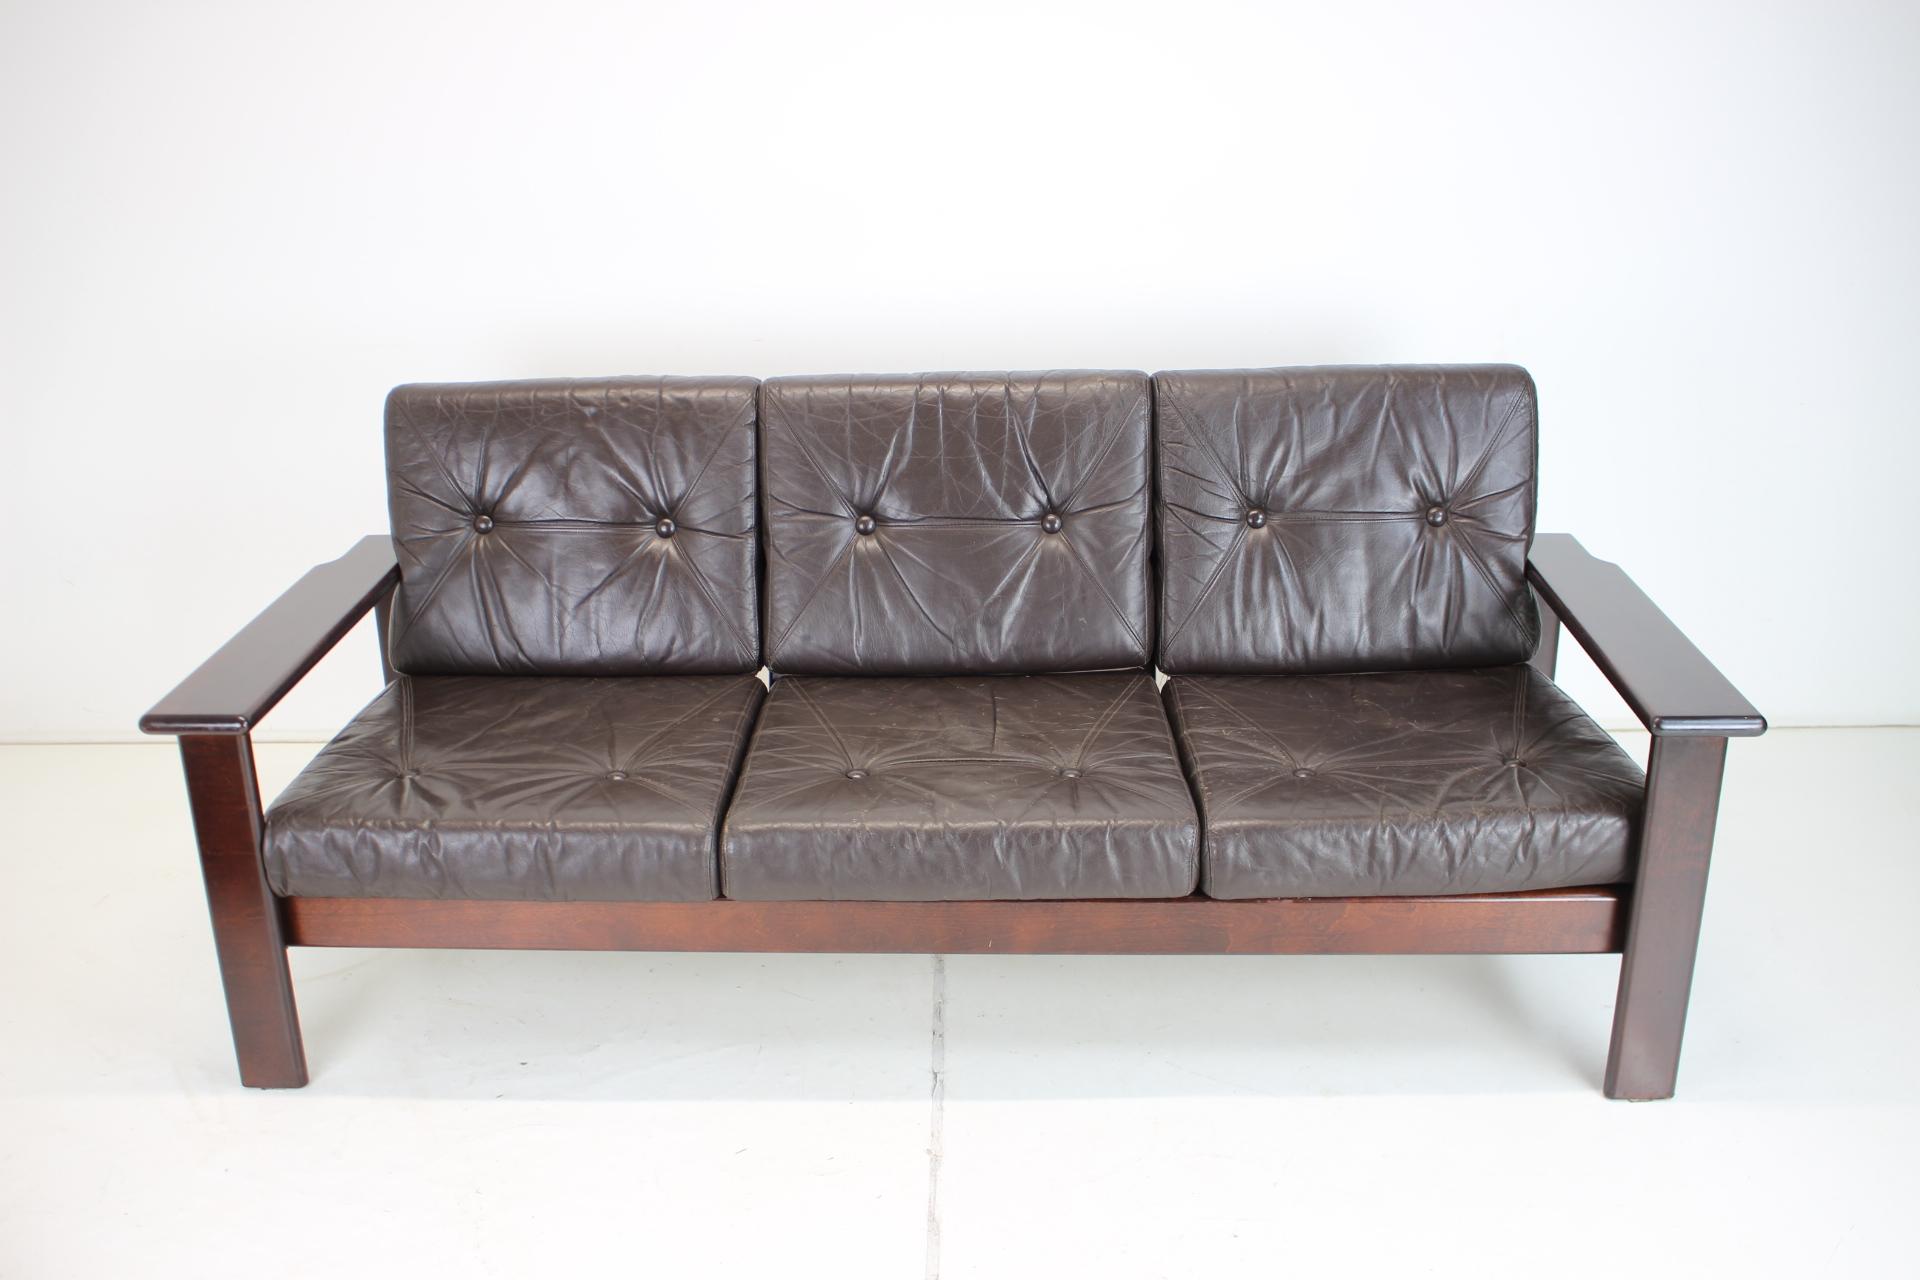 - Good original condition with minor signs of use 
- Patinated leather
- Measures: height of seat 38 cm.
 